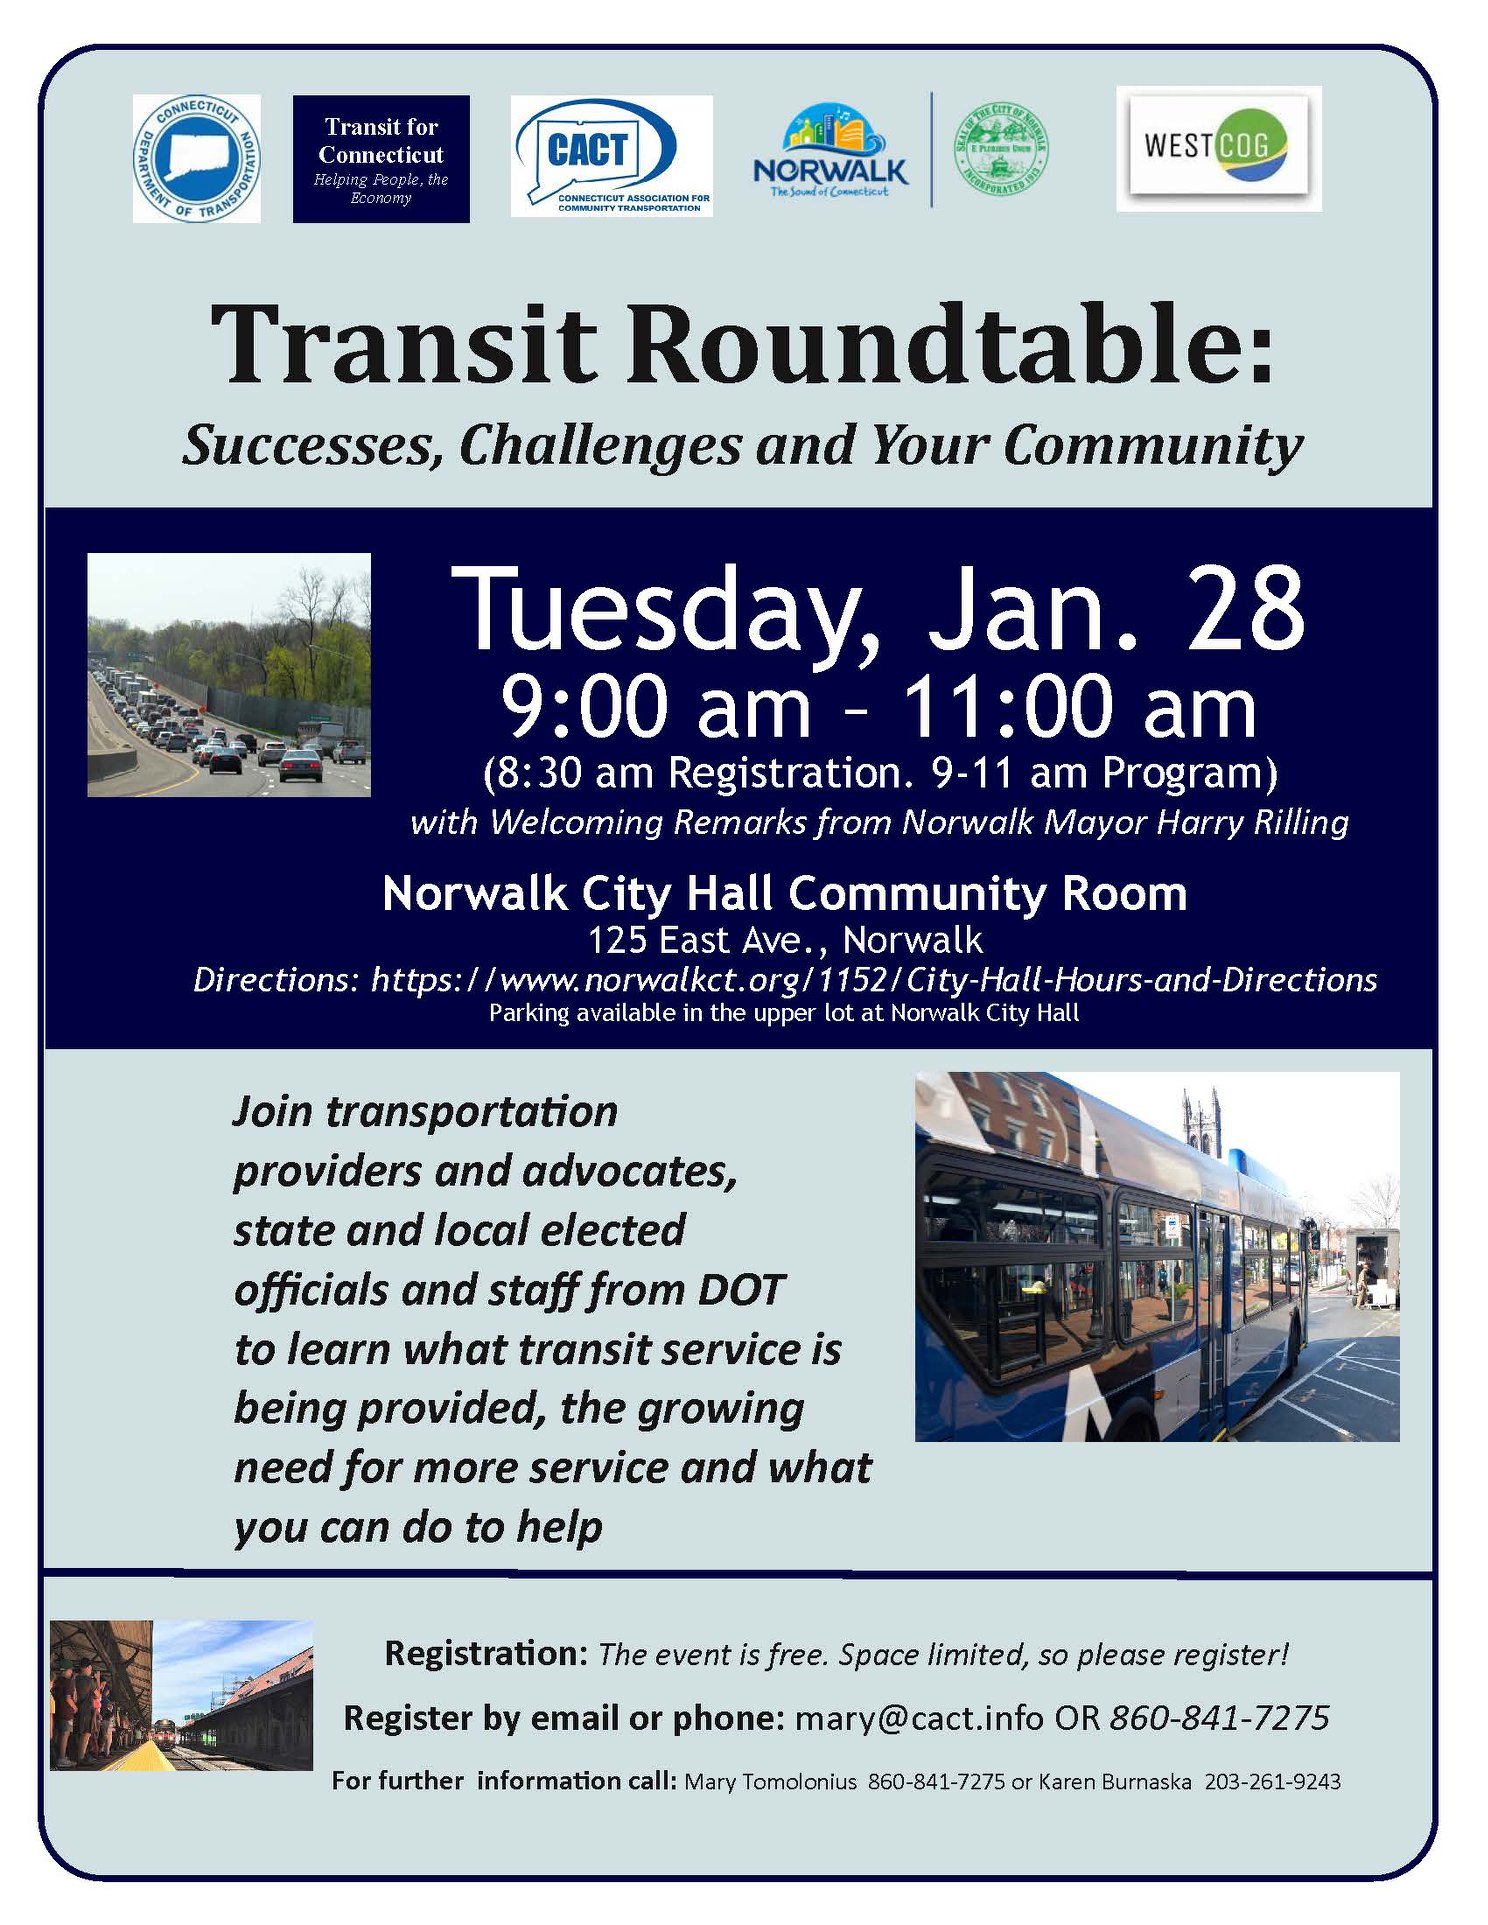 Transit Roundtable: Successes, Challenges and Your Community